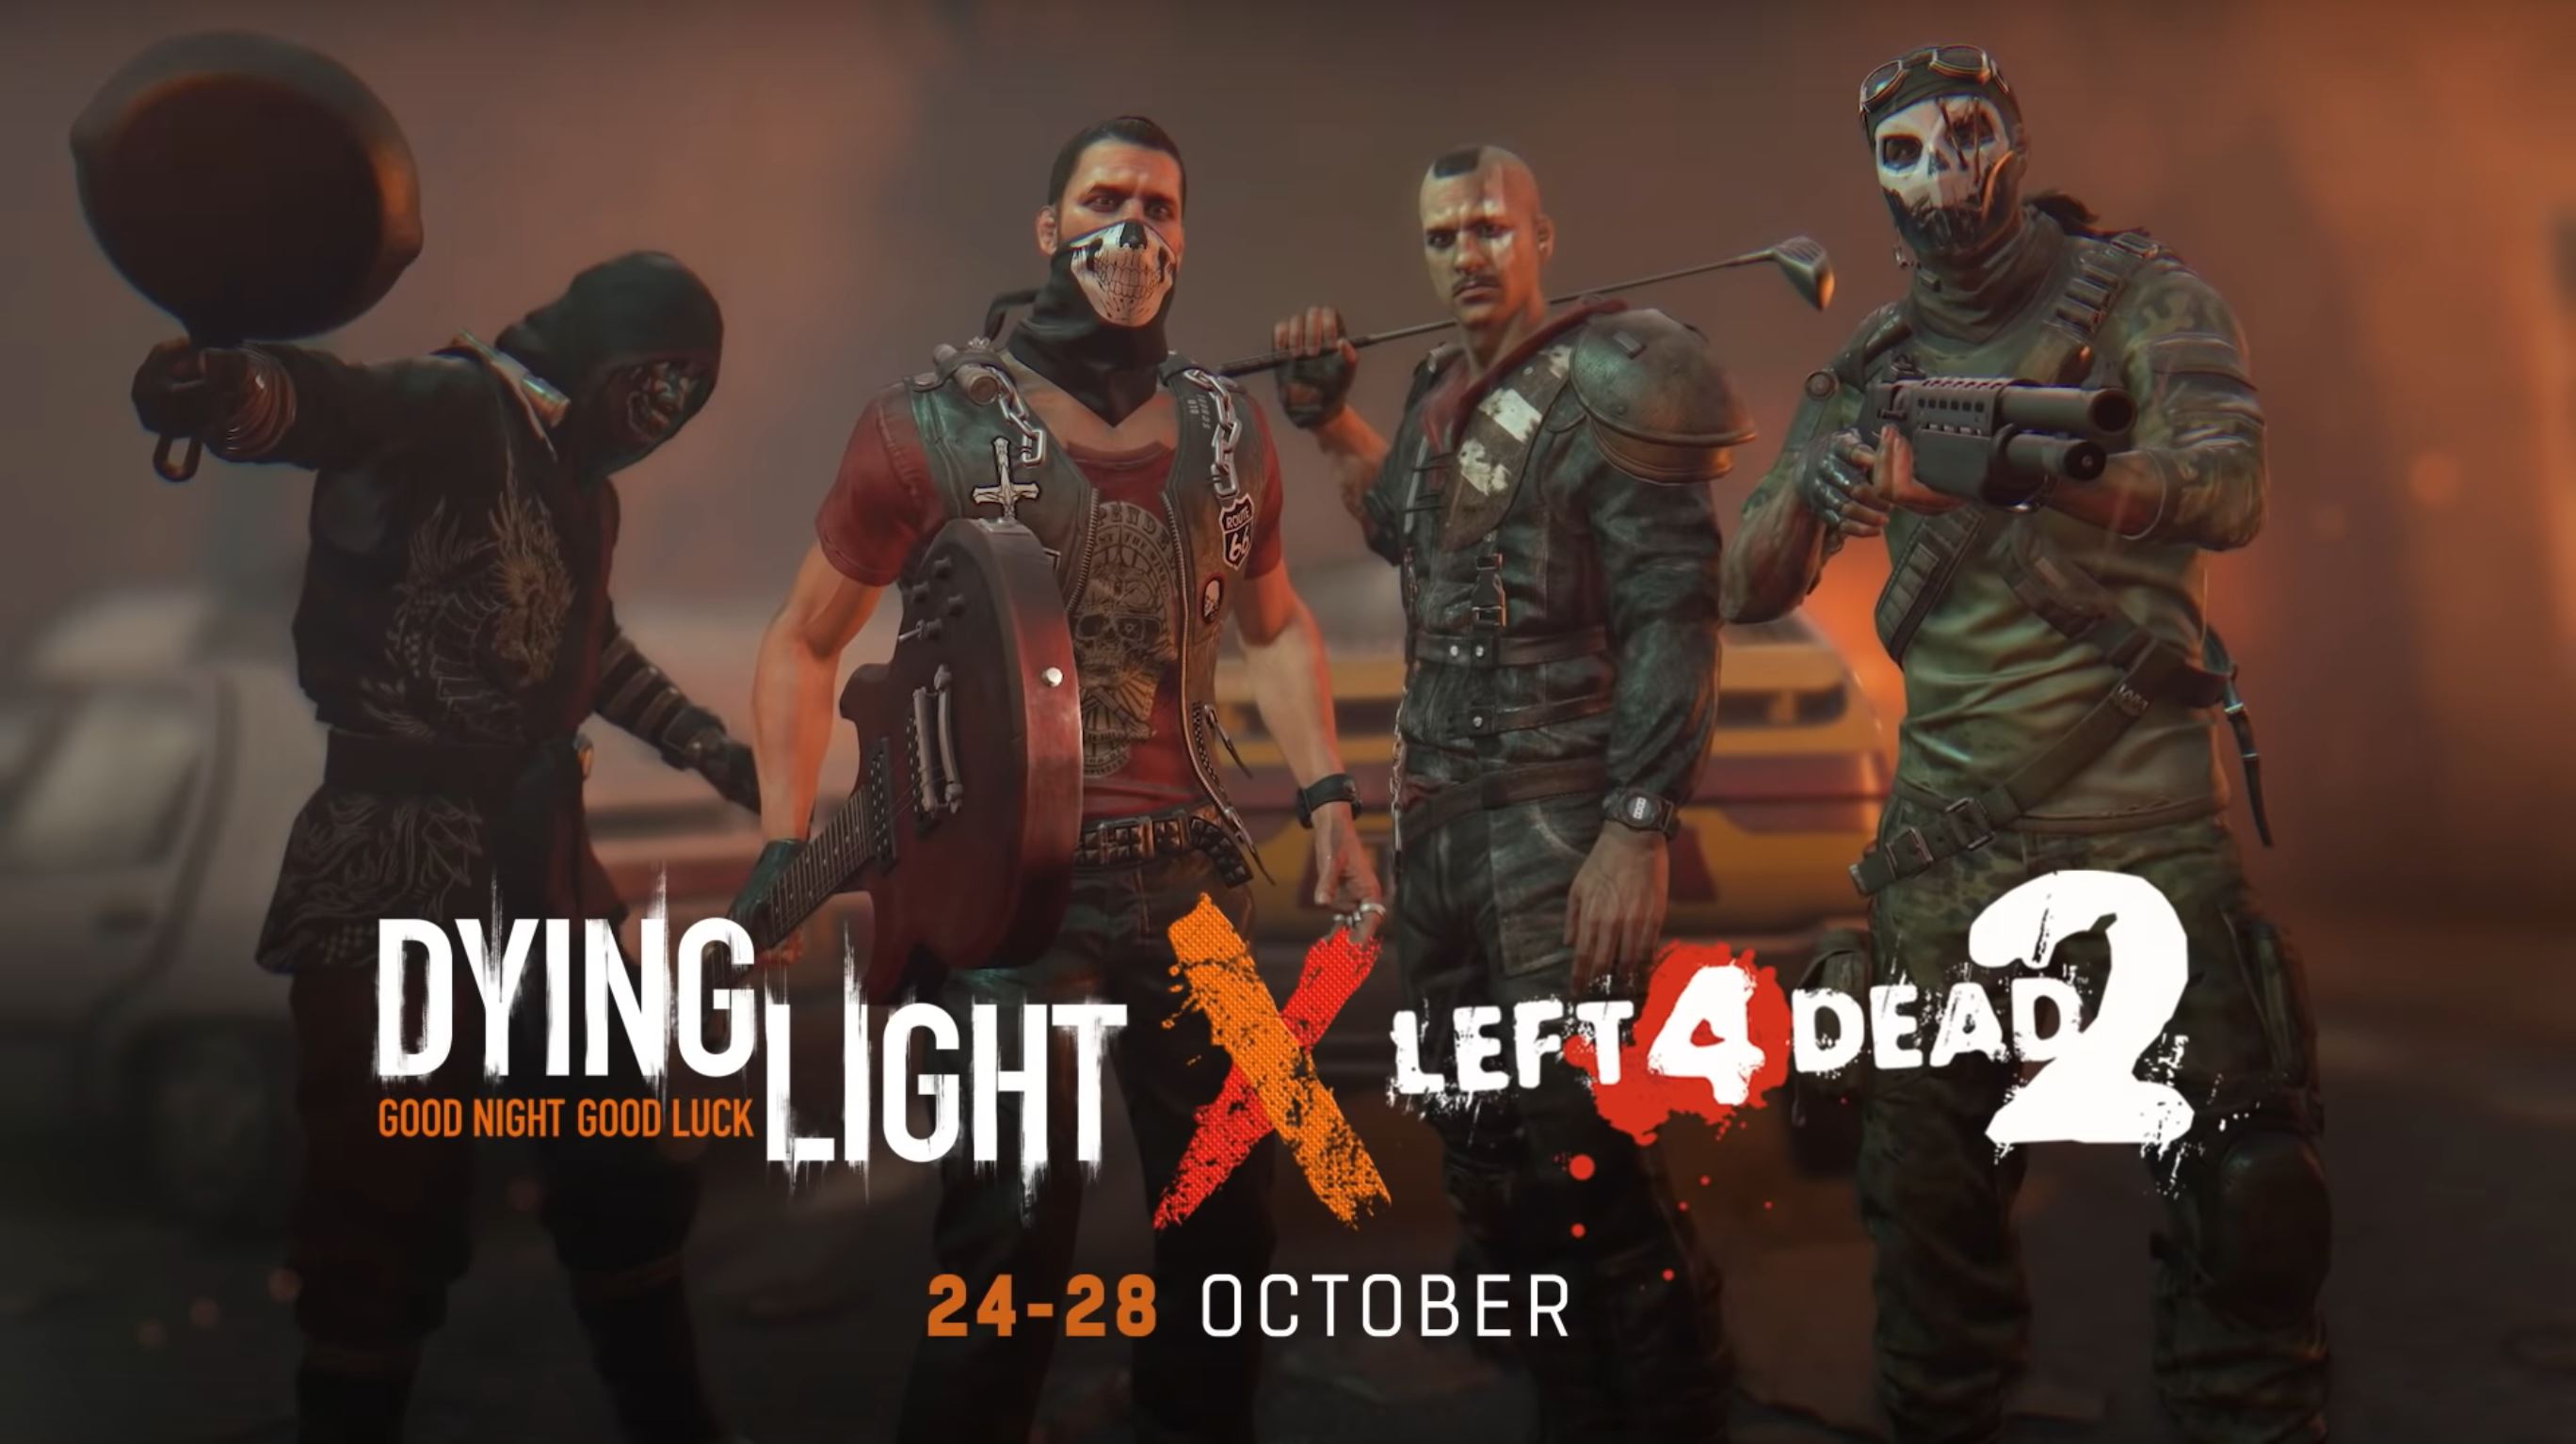 The Dying Light Left 4 Dead 2 Crossover Event Has Arrived